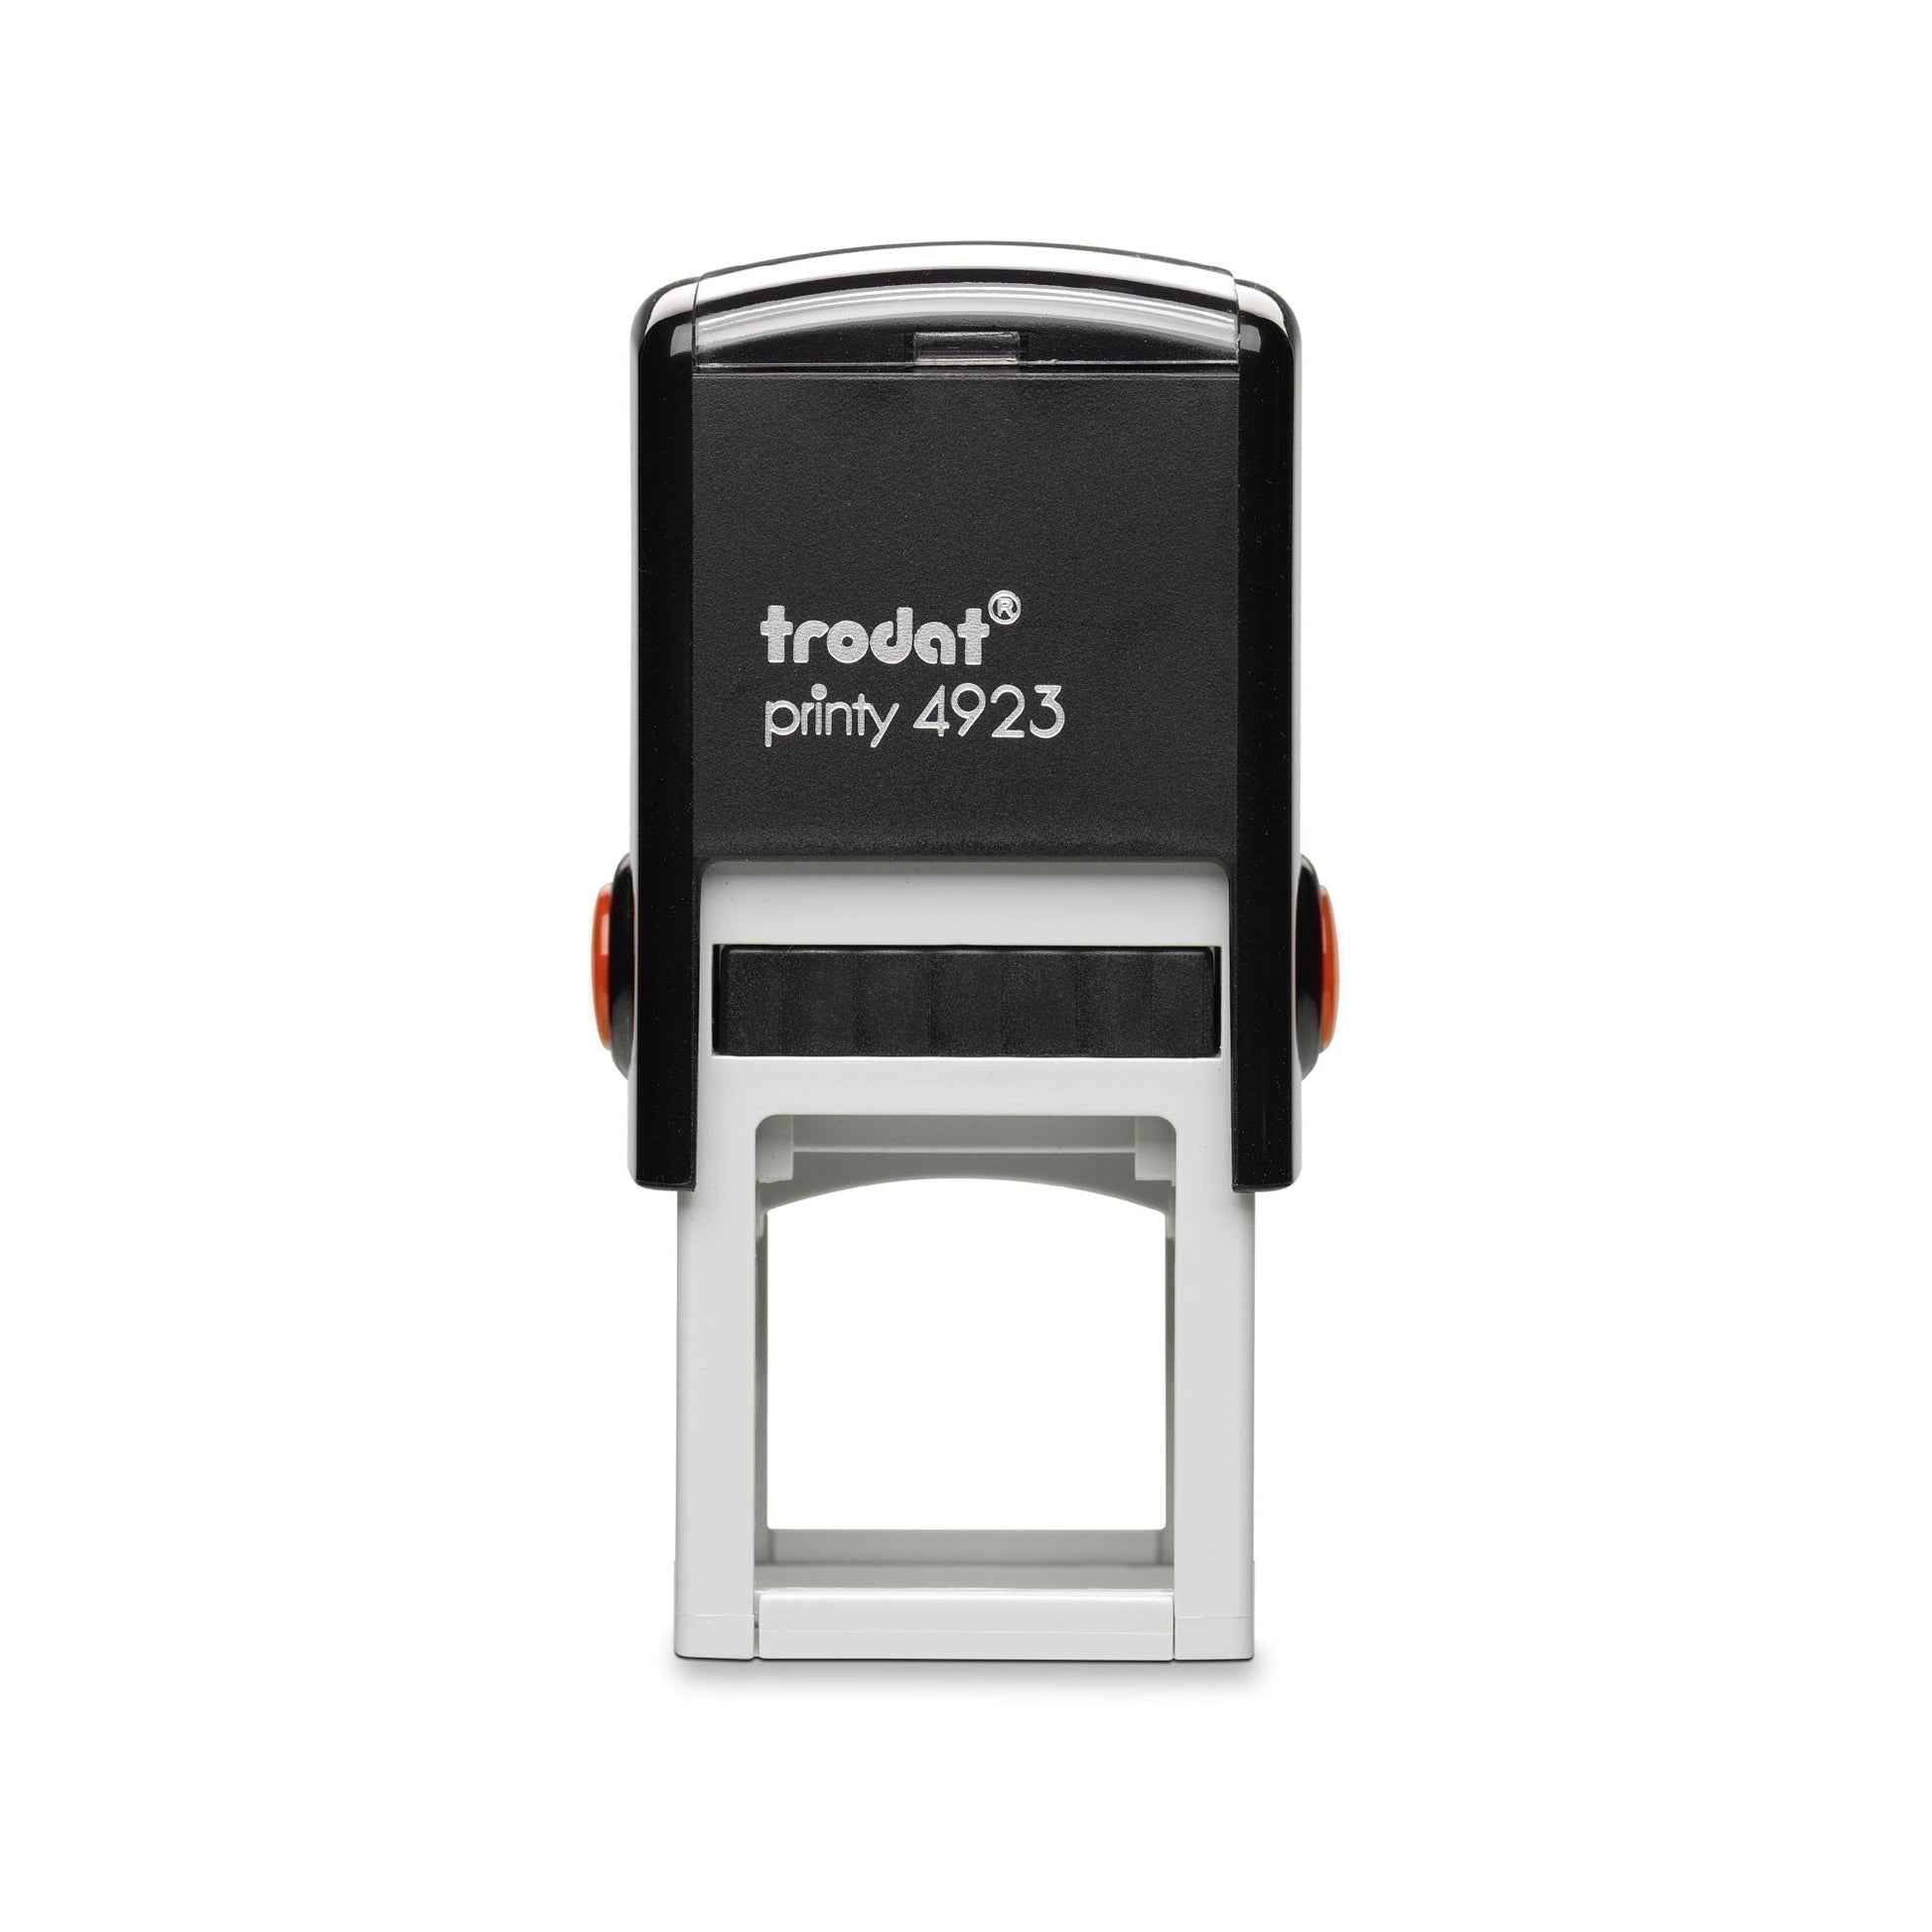 Independent Serviced To Manufacturers Schedule - Self Inking Rubber Stamp - Trodat 4923 - 28mm x 28mm Impression